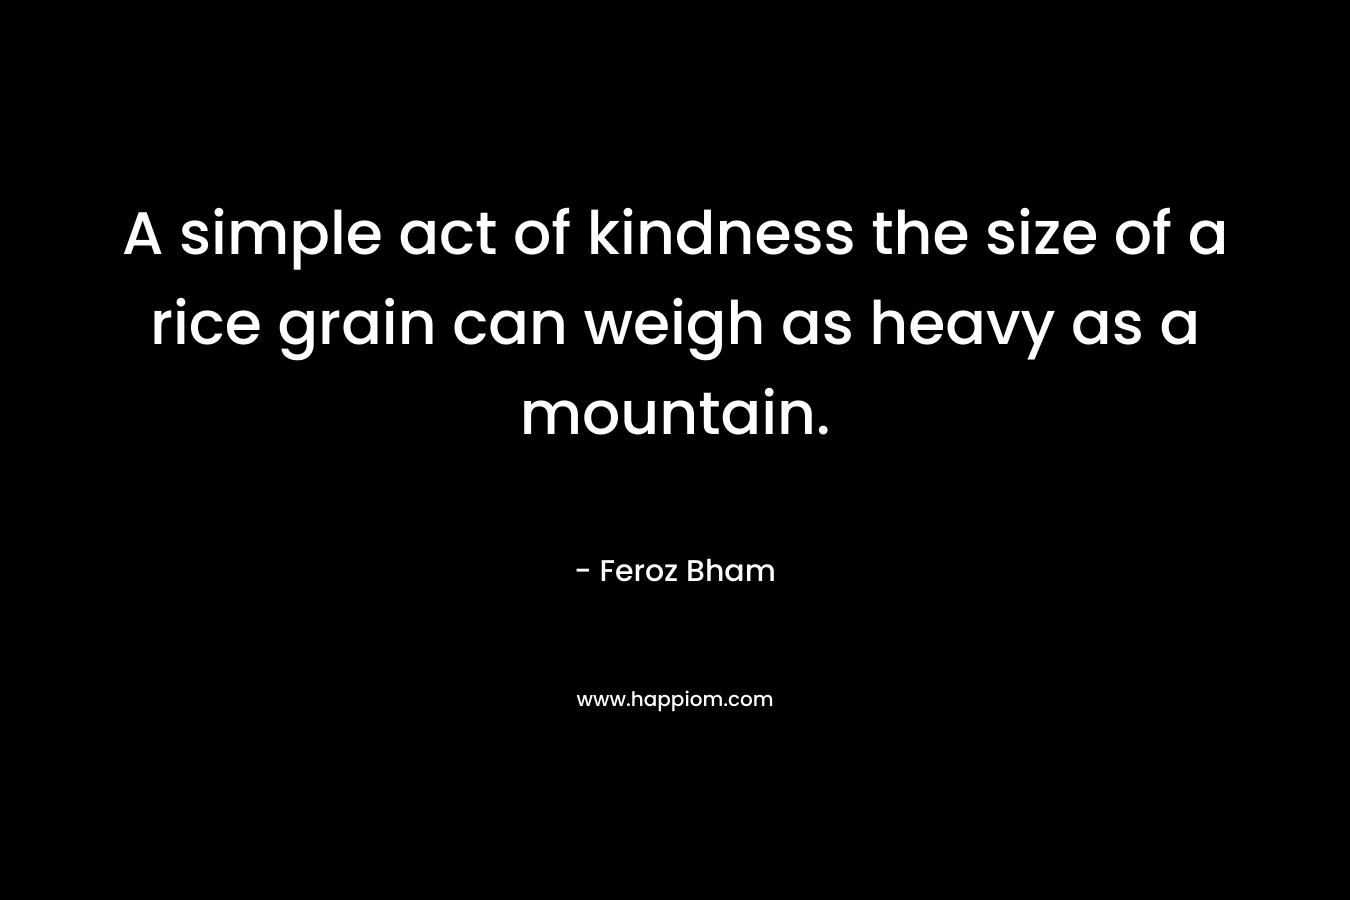 A simple act of kindness the size of a rice grain can weigh as heavy as a mountain. – Feroz Bham